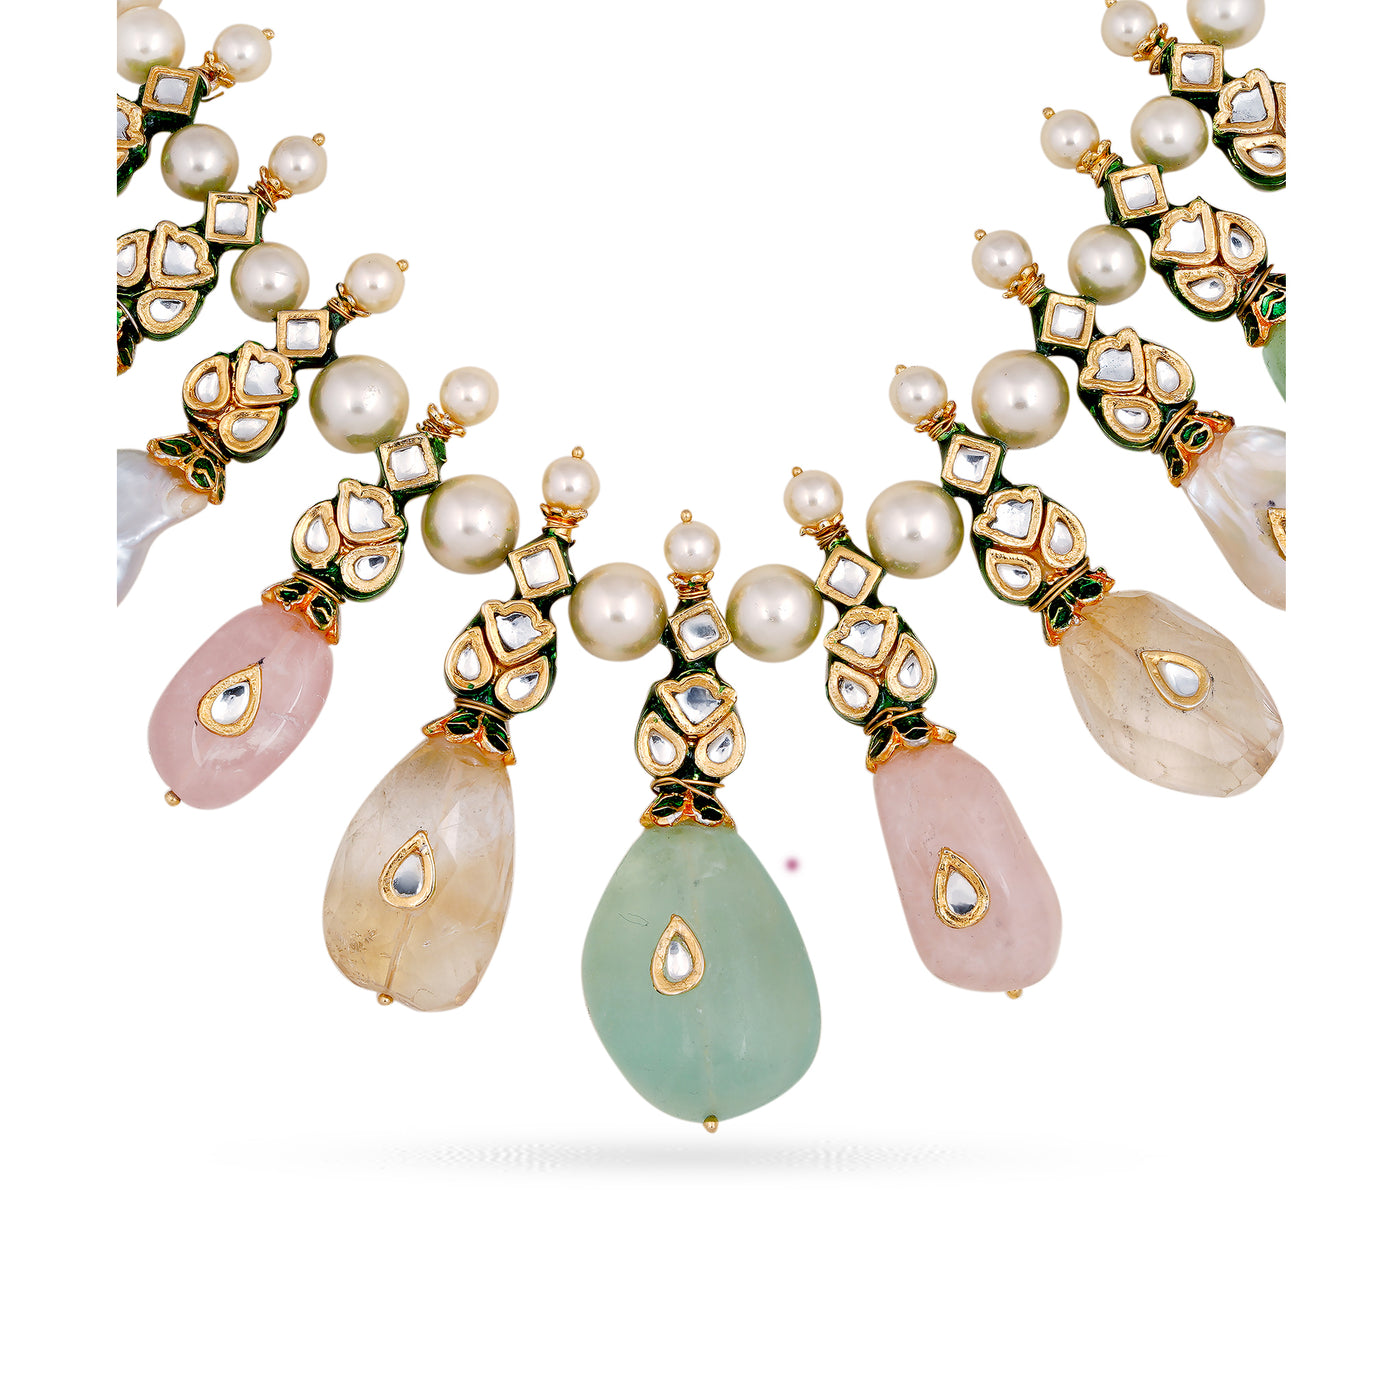 Gold plated silver mix base metal kundan necklace and earrings set with real pearls and Fluorite, Rose Quartz and Baroque pearls . The set has hand-painted meenakari work at the back of the set.